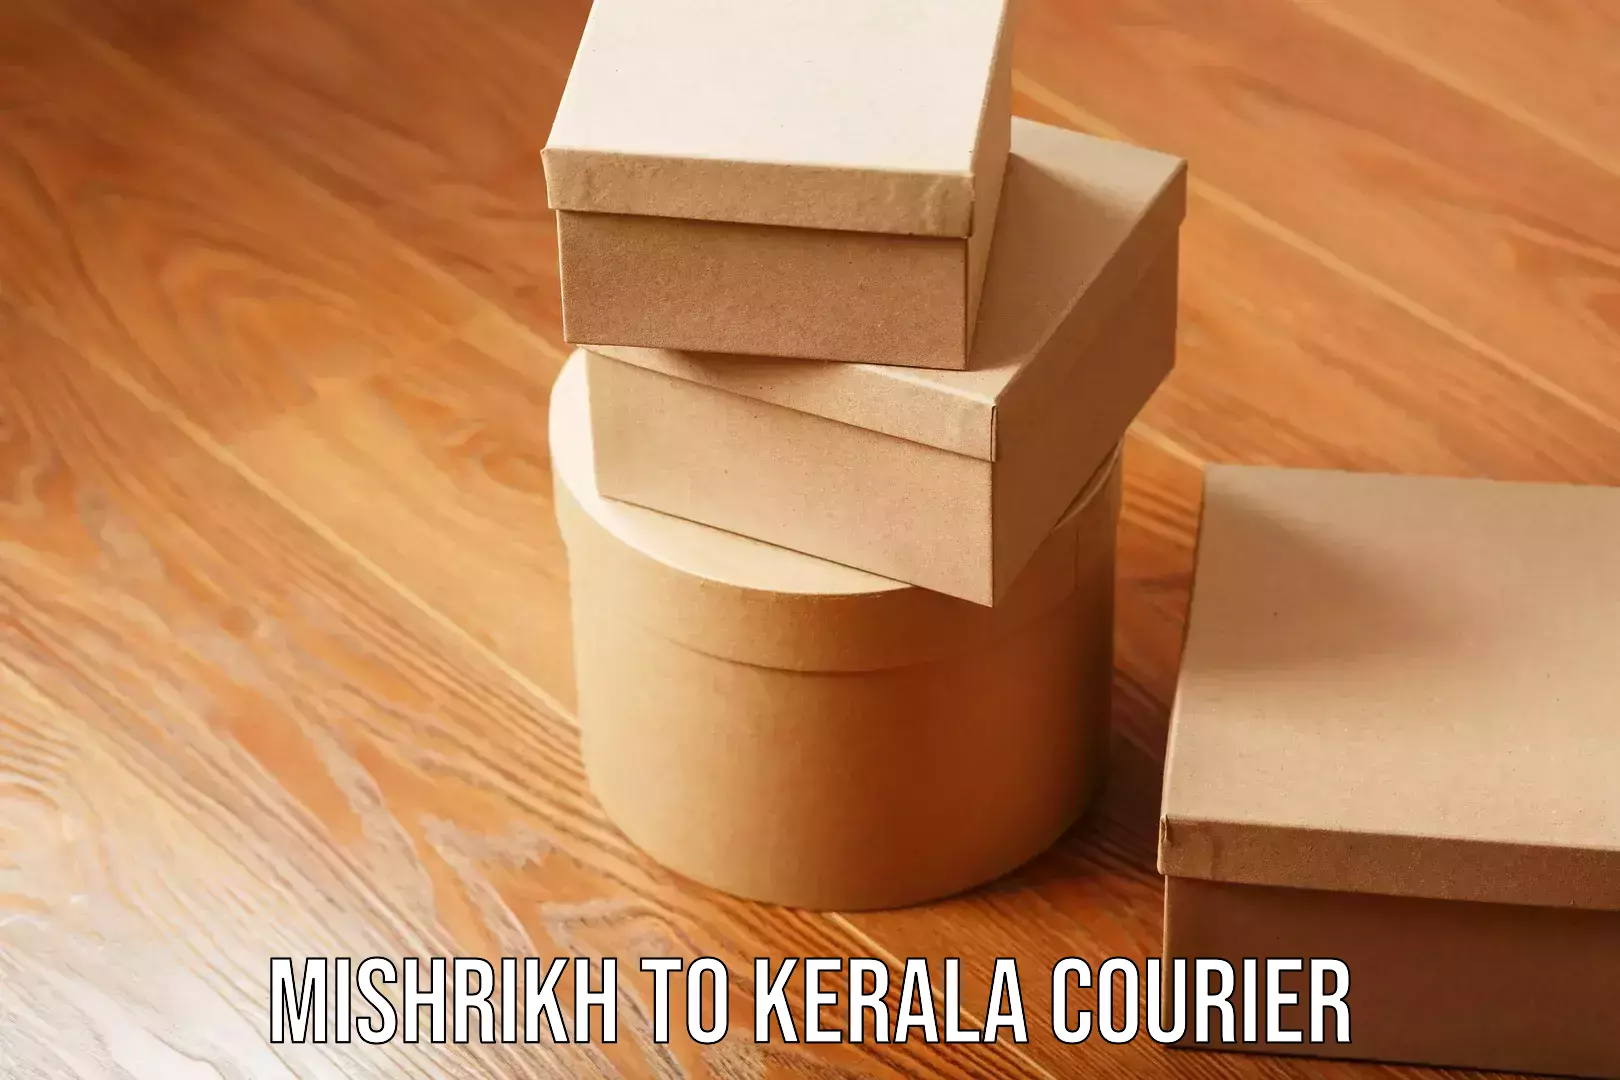 Professional packing services in Mishrikh to Kerala